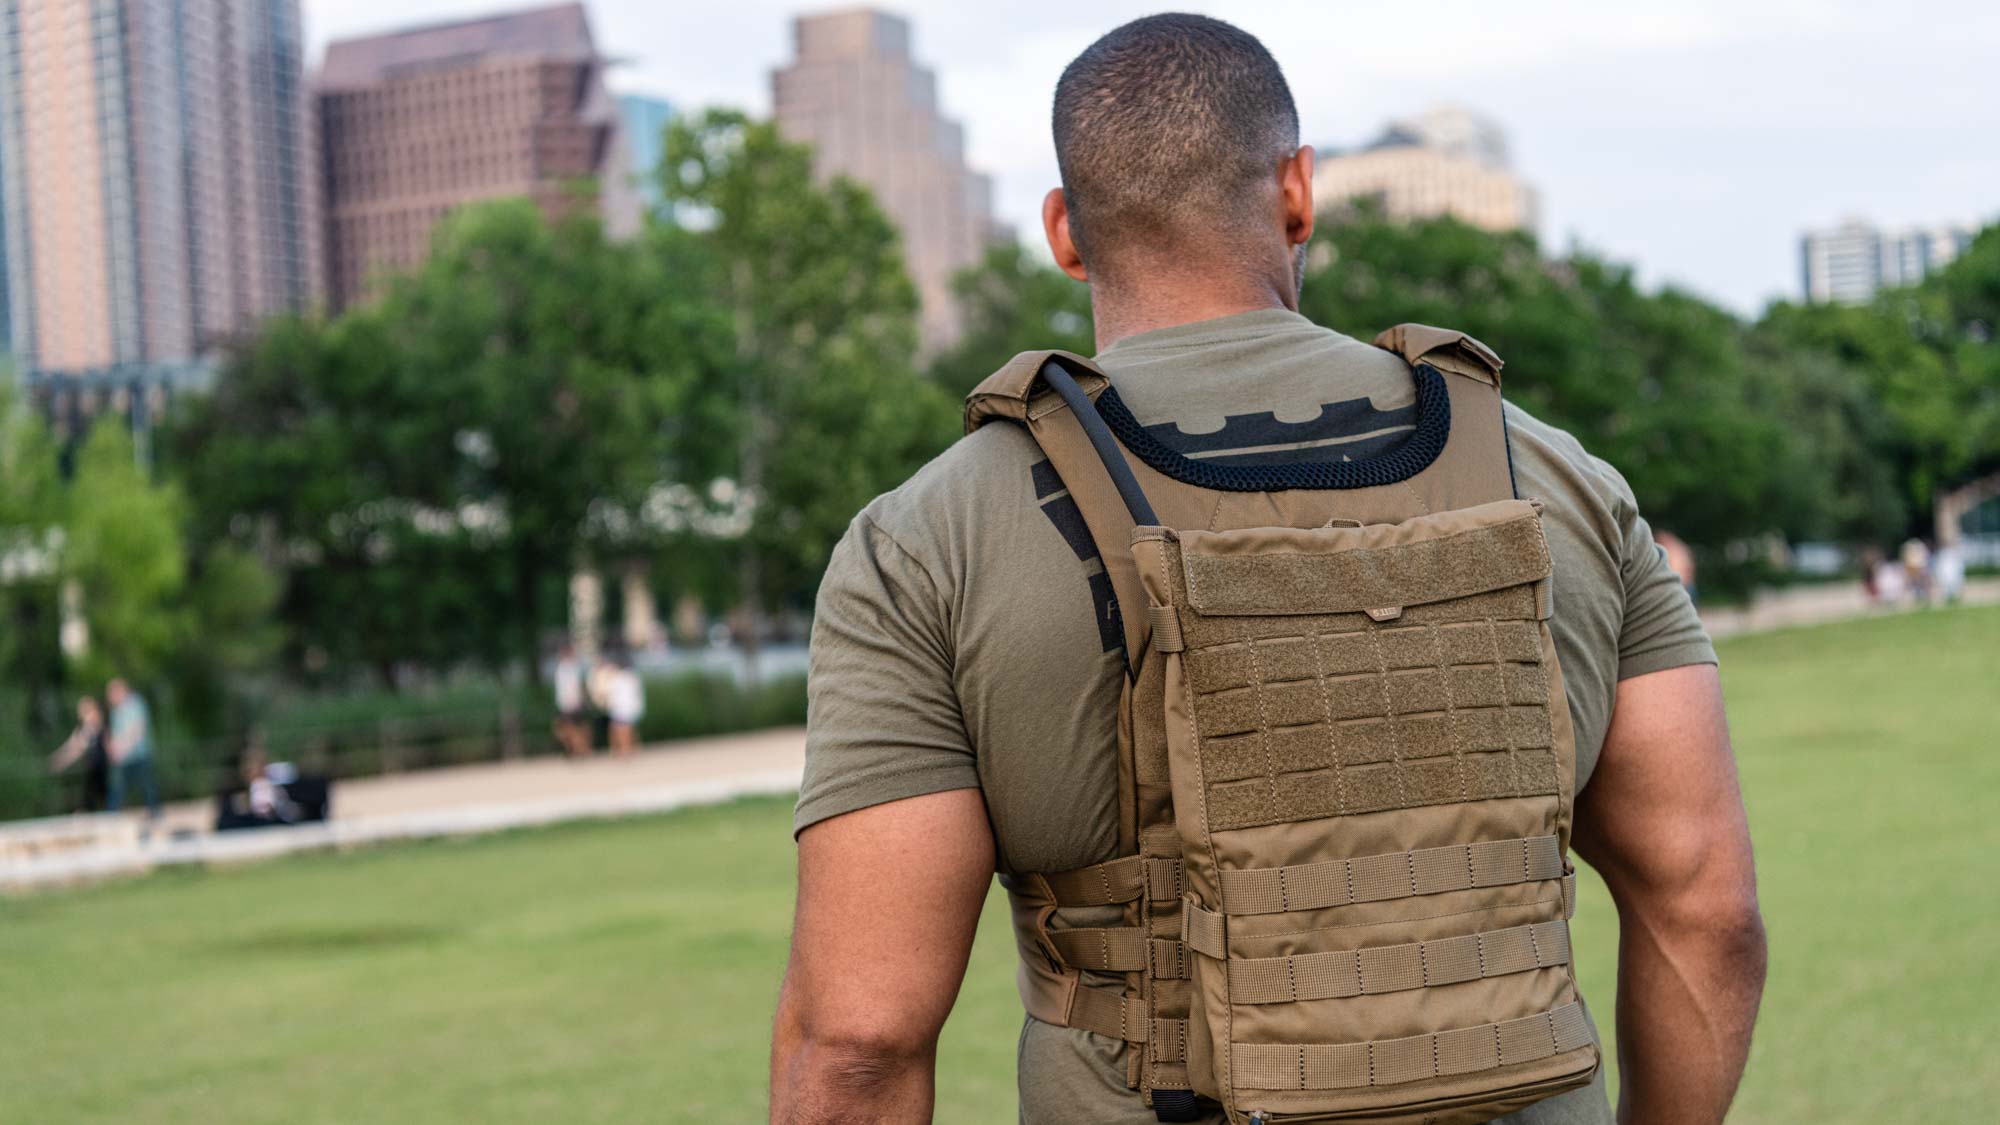 Black Tactical Molle Plate Carrier Vest Great For Crossfit & Endurance Training 